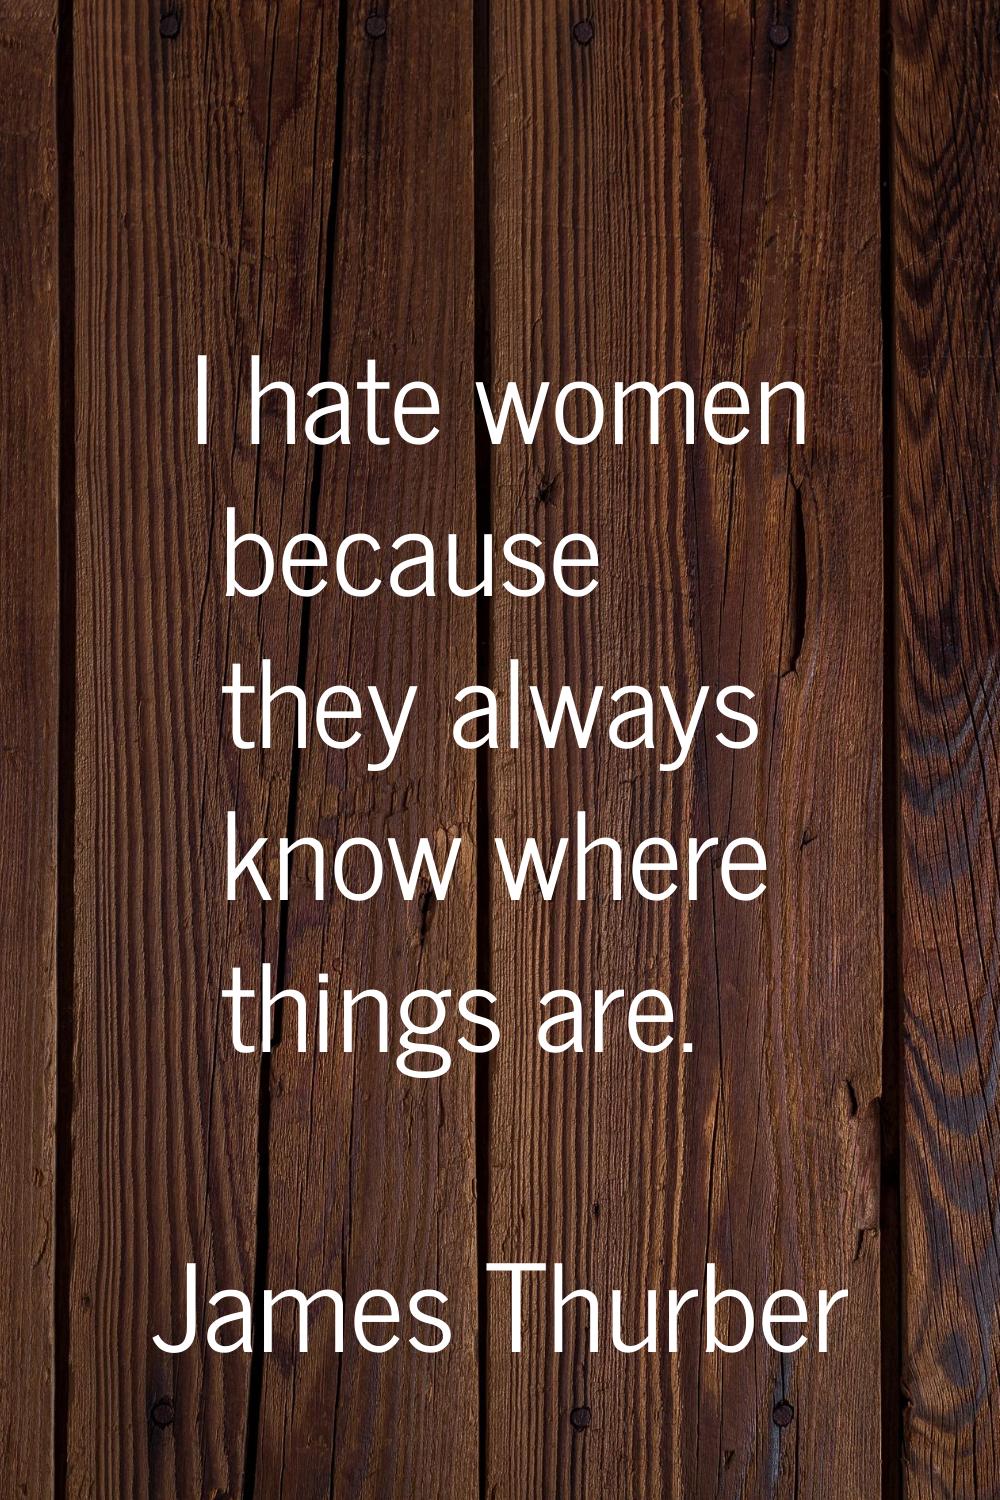 I hate women because they always know where things are.